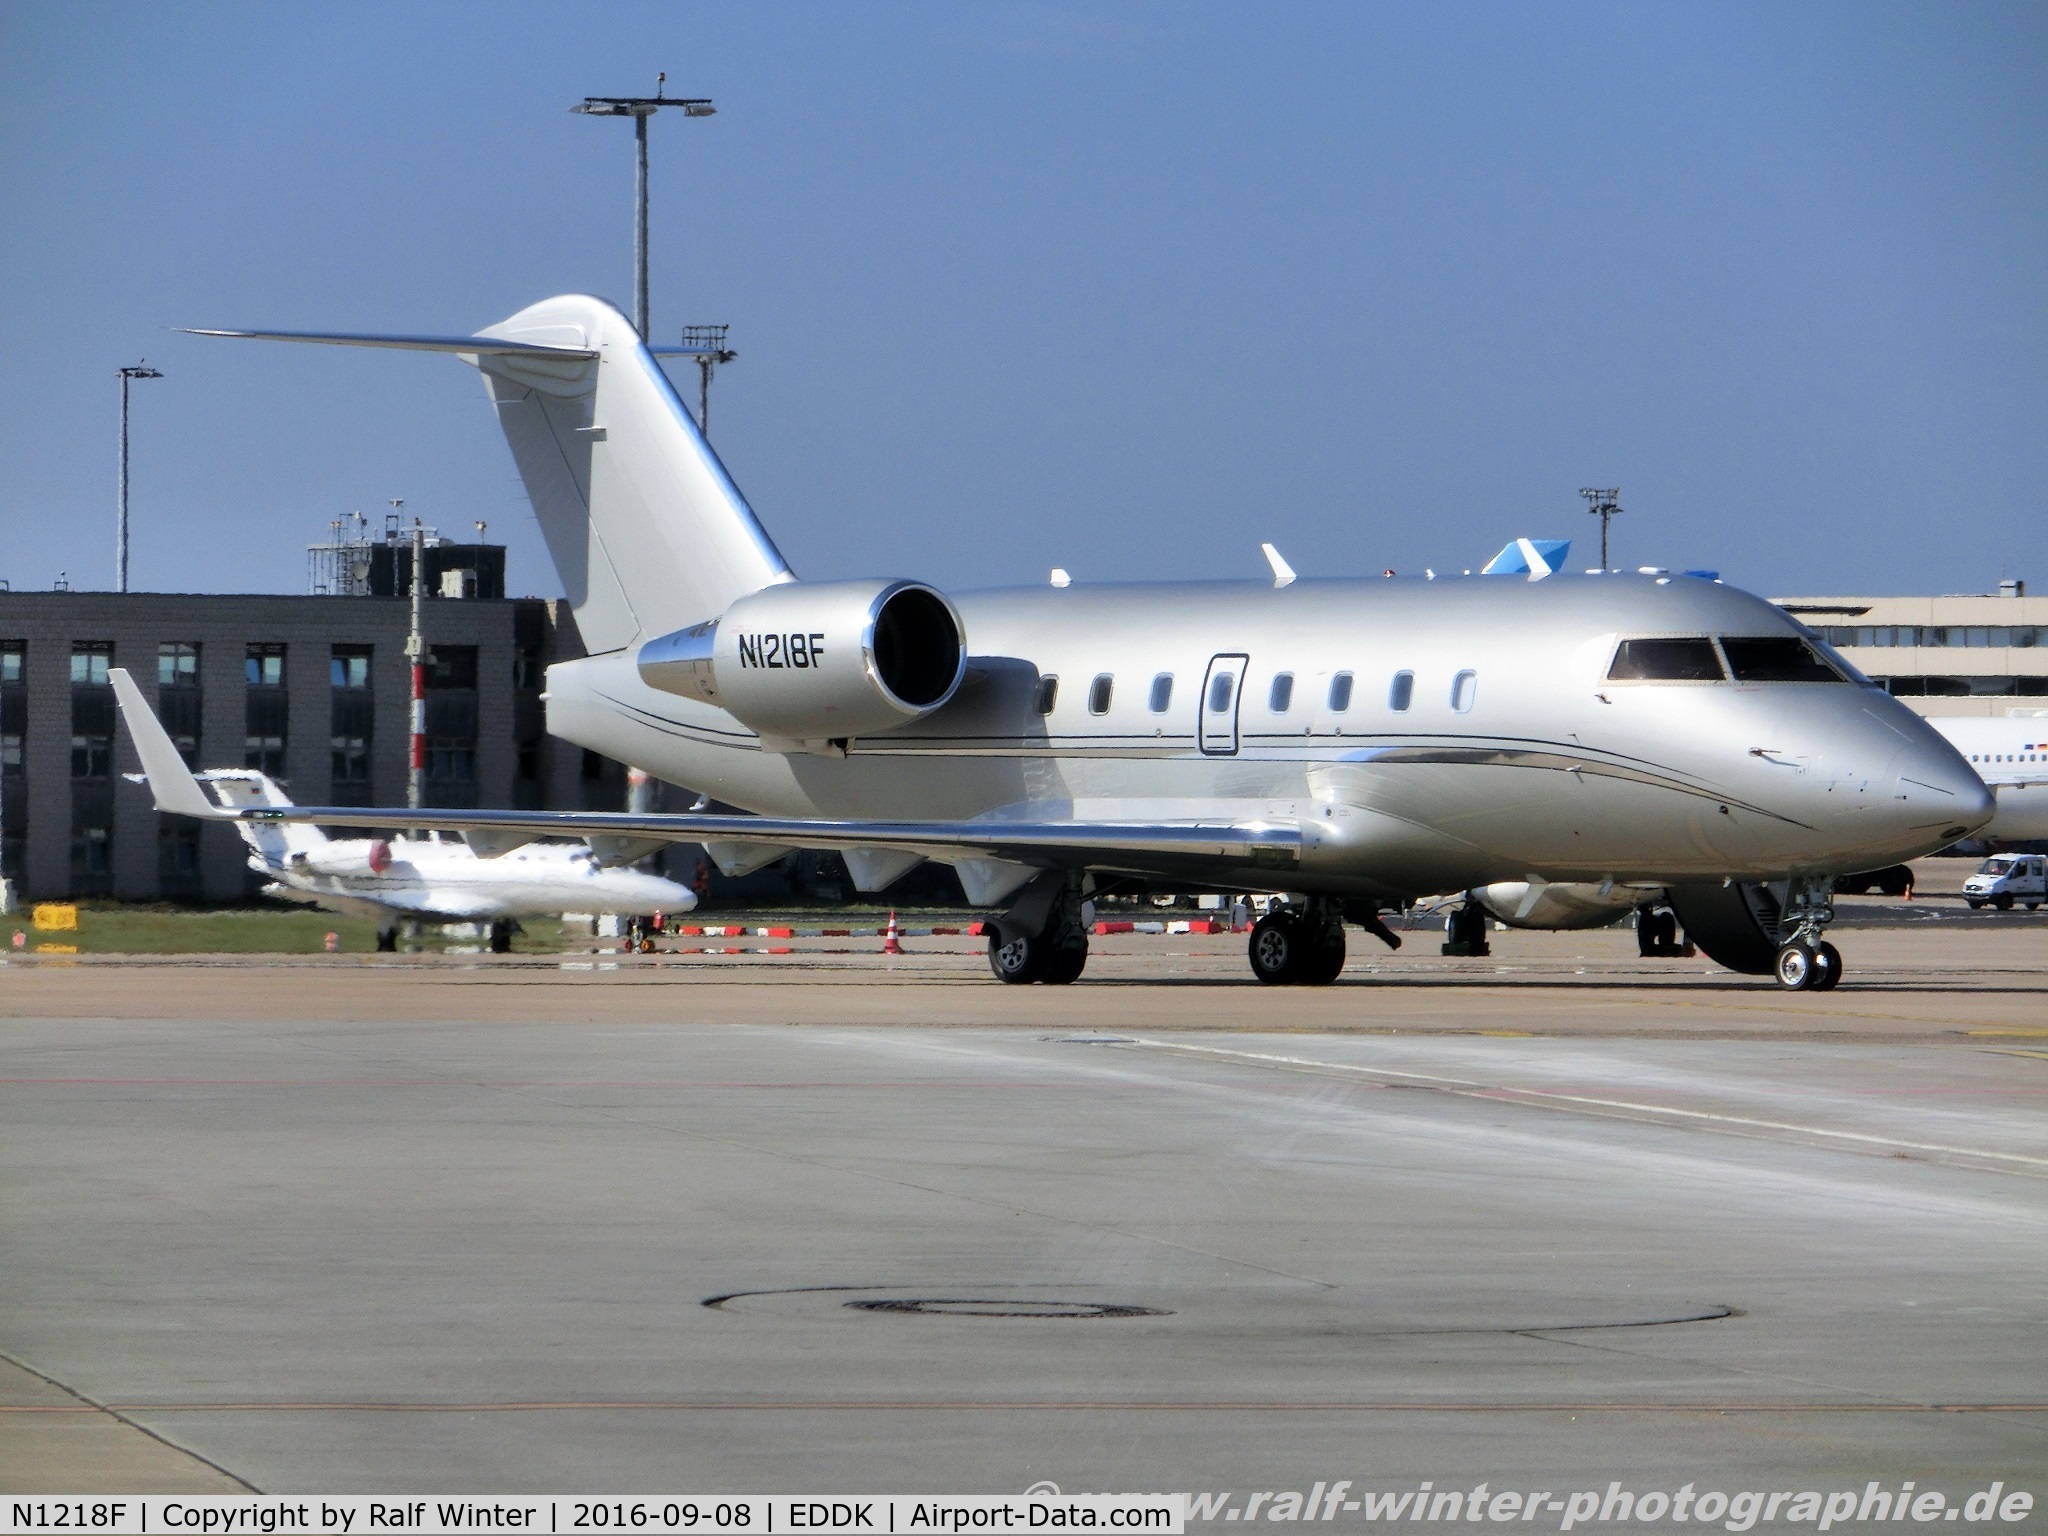 N1218F, 2006 Bombardier Challenger 604 (CL-600-2B16) C/N 5658, Bombardier CL-600-2B16 Challenger 604 - TYPX ARS Inc - 5658 - N1218F - 08.09.2016 - CGN